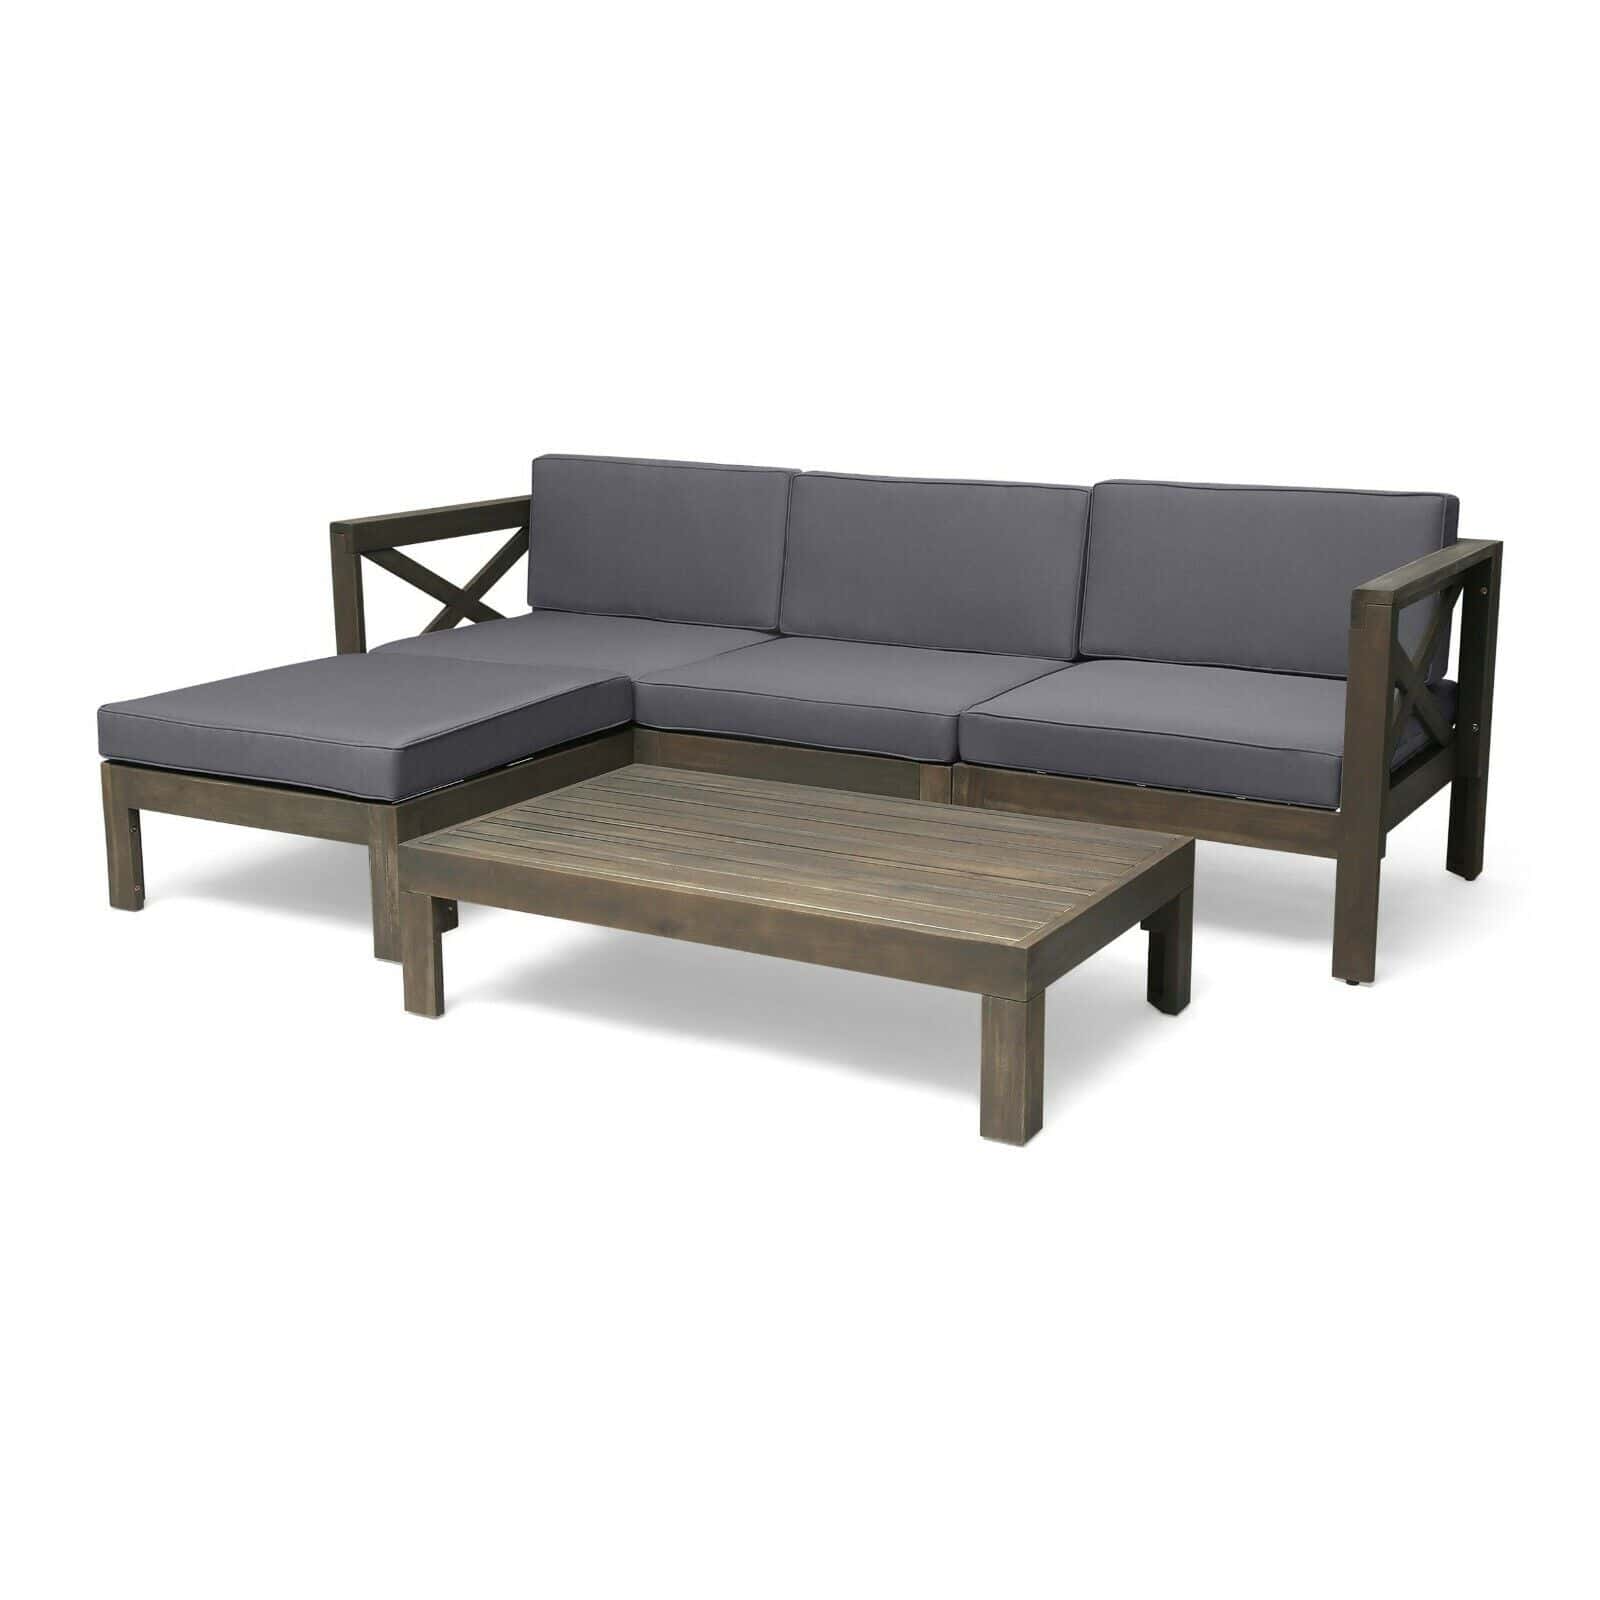 An outdoor sectional sofa set with grey cushions and coffee table.